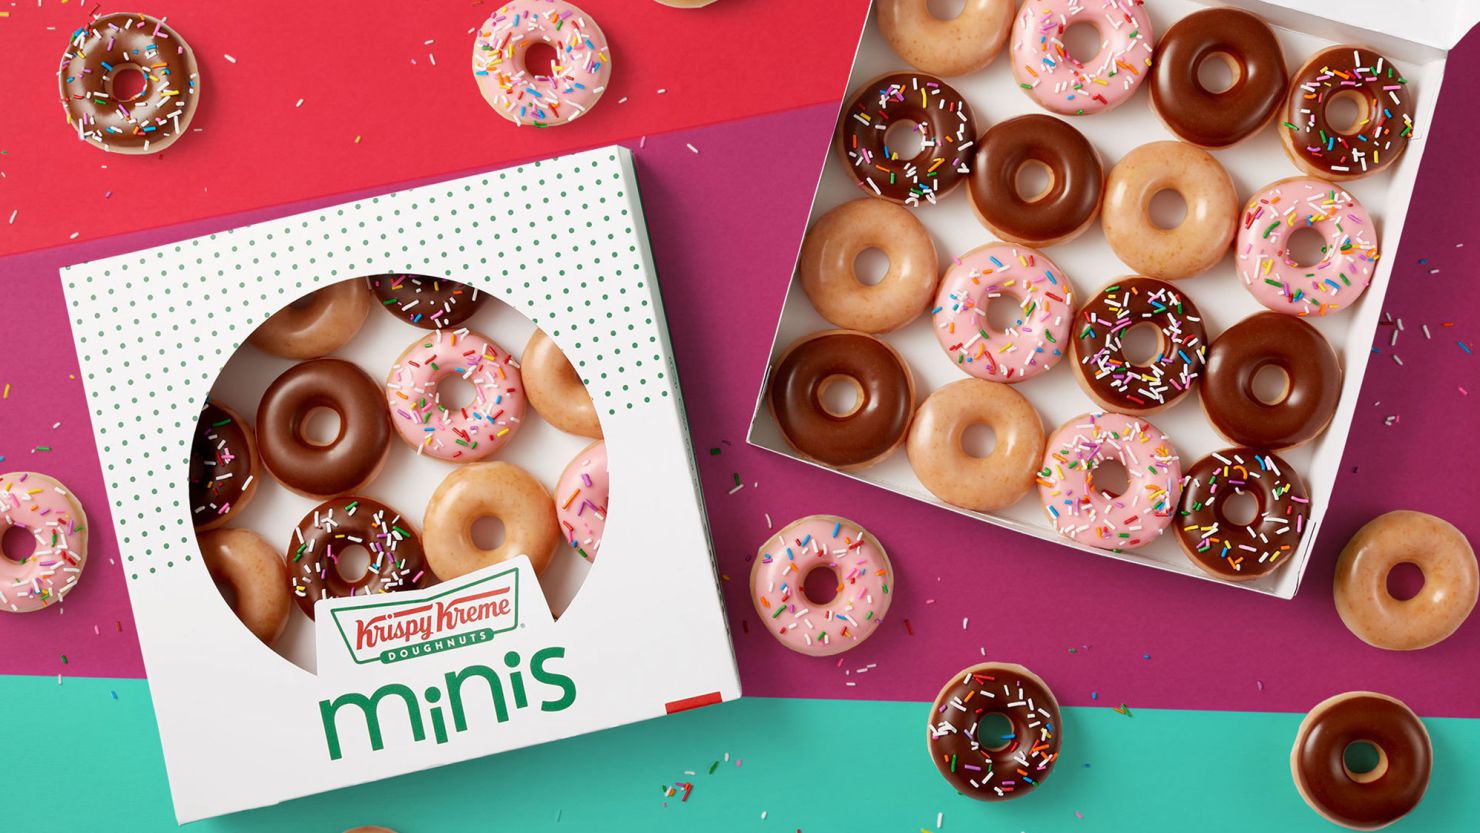 The new mini doughnuts will be available starting Monday and will become a permanent menu item.